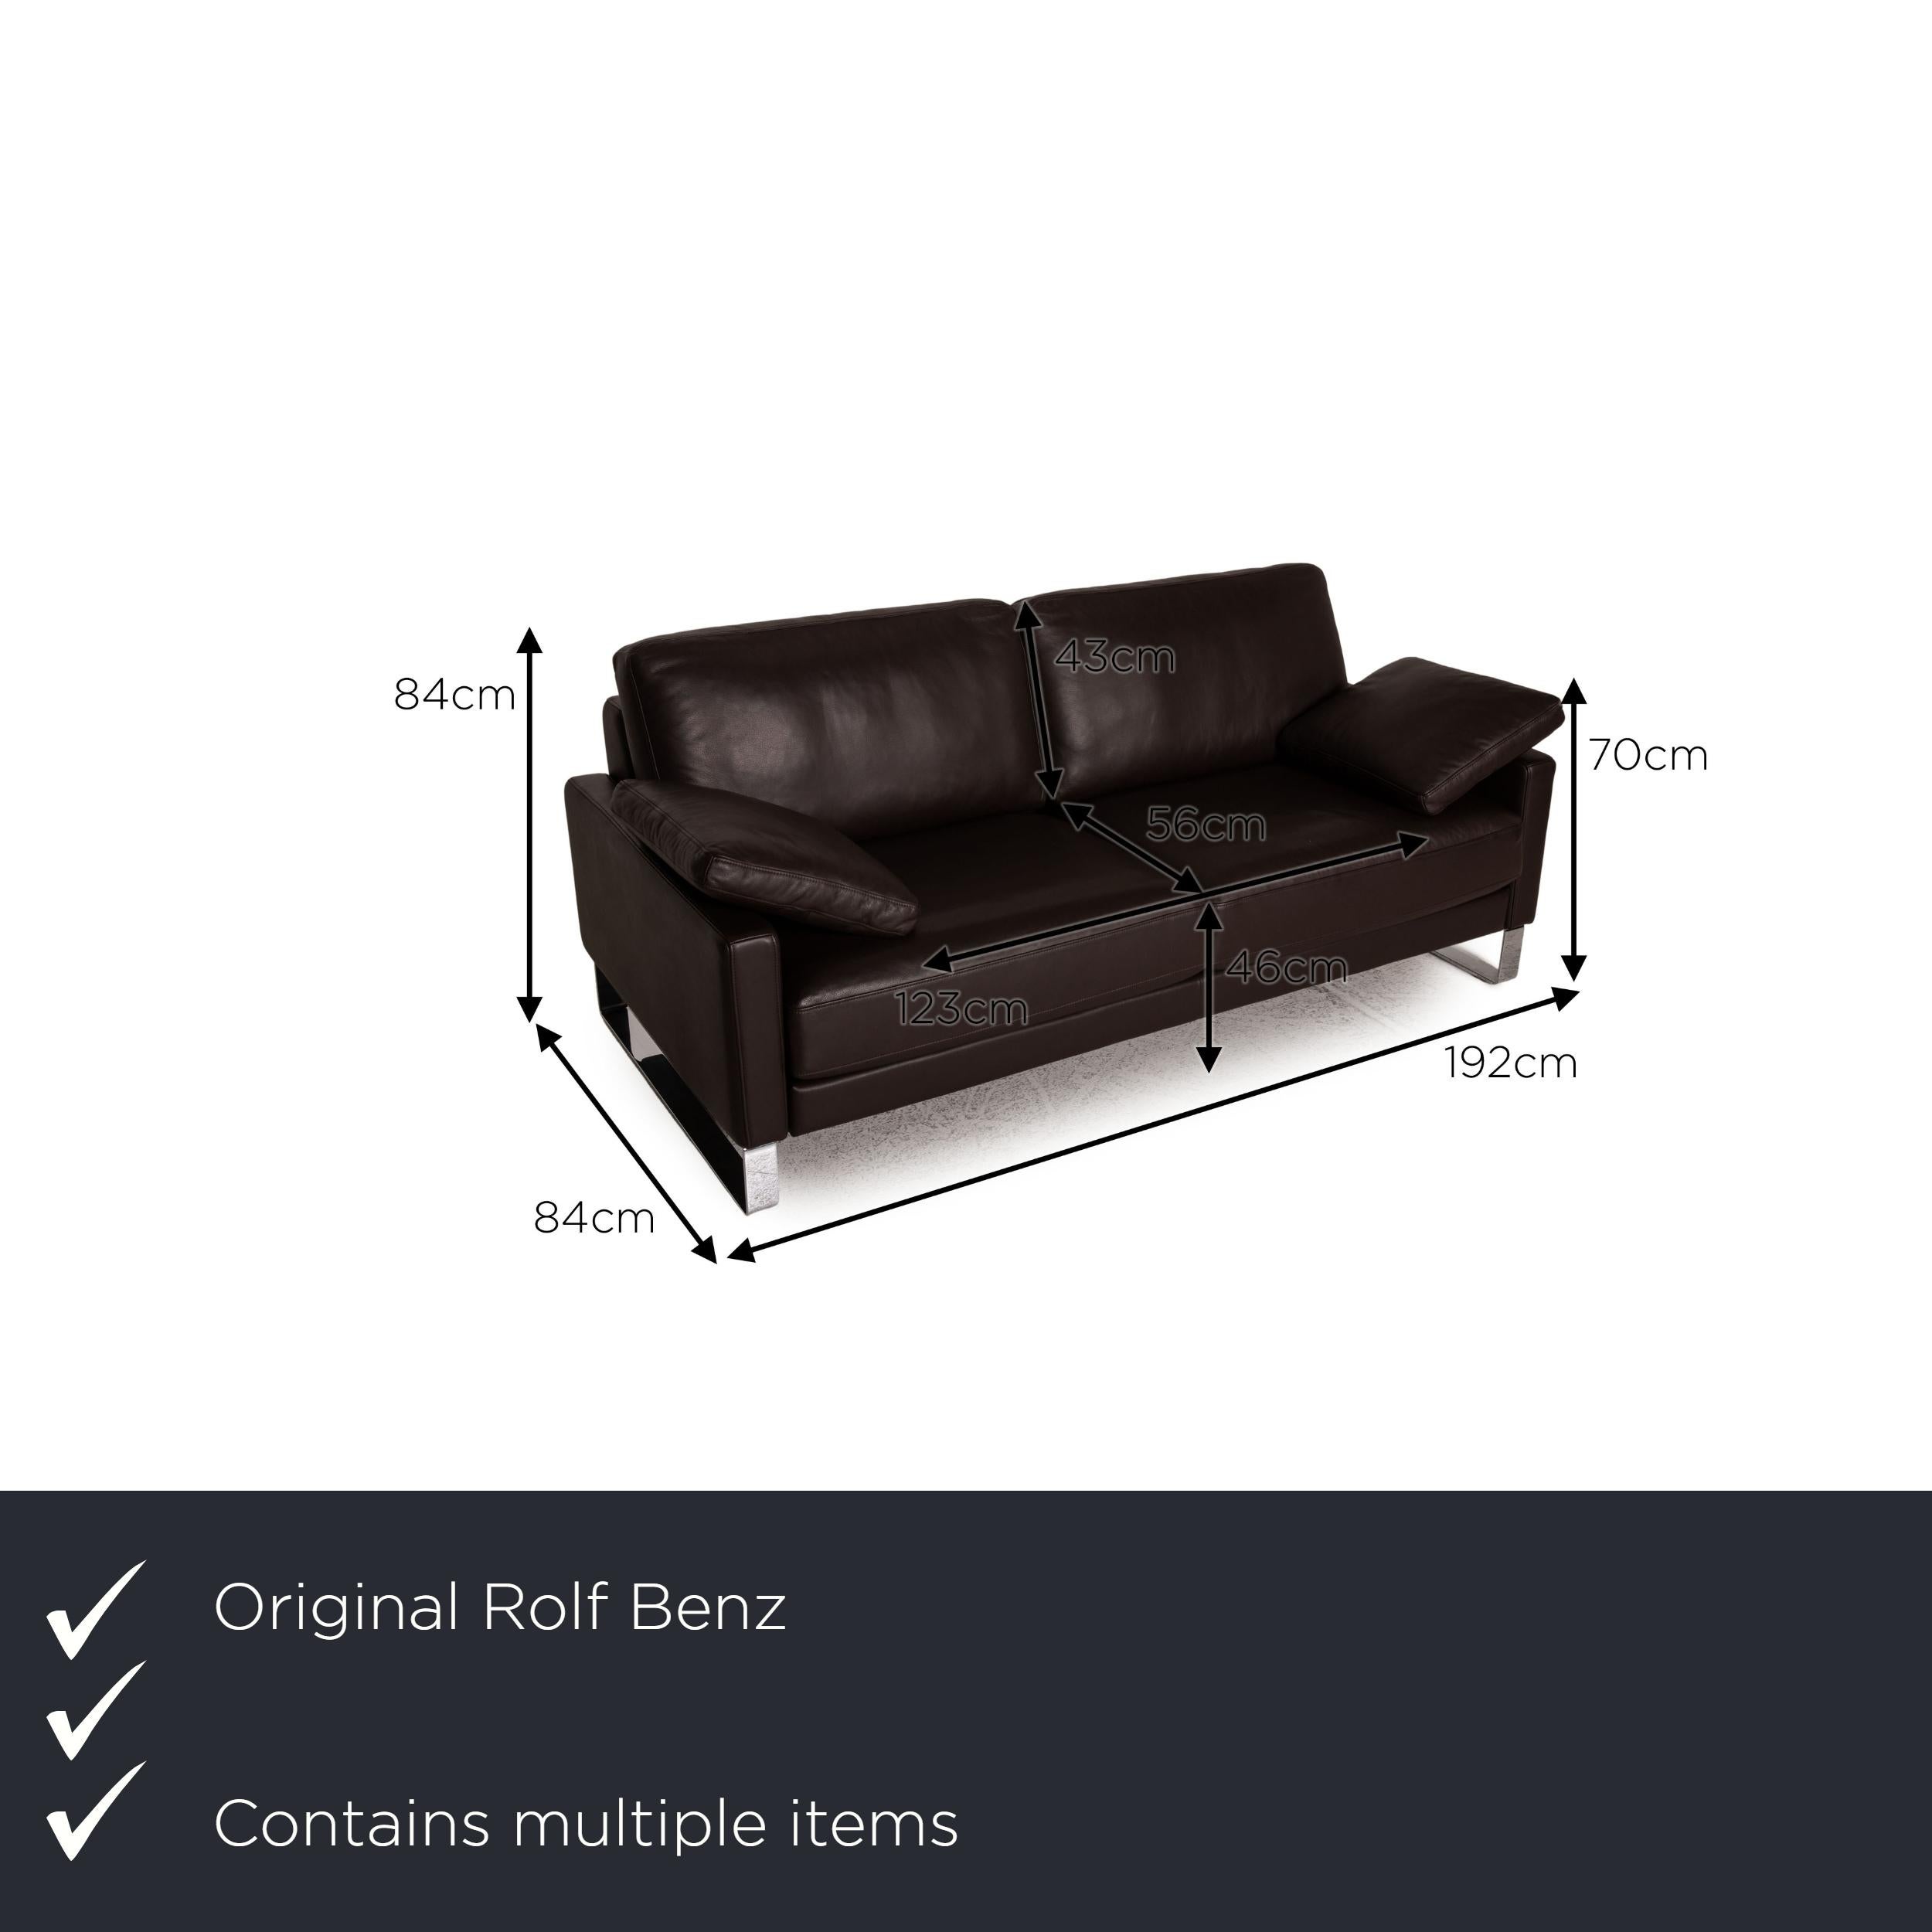 We present to you a Rolf Benz Ego leather sofa set dark brown two-seater 2x armchairs couch.

Product measurements in centimeters:

depth: 97
width: 192
height: 84
seat height: 46
rest height: 70
seat depth: 56
seat width: 123
back